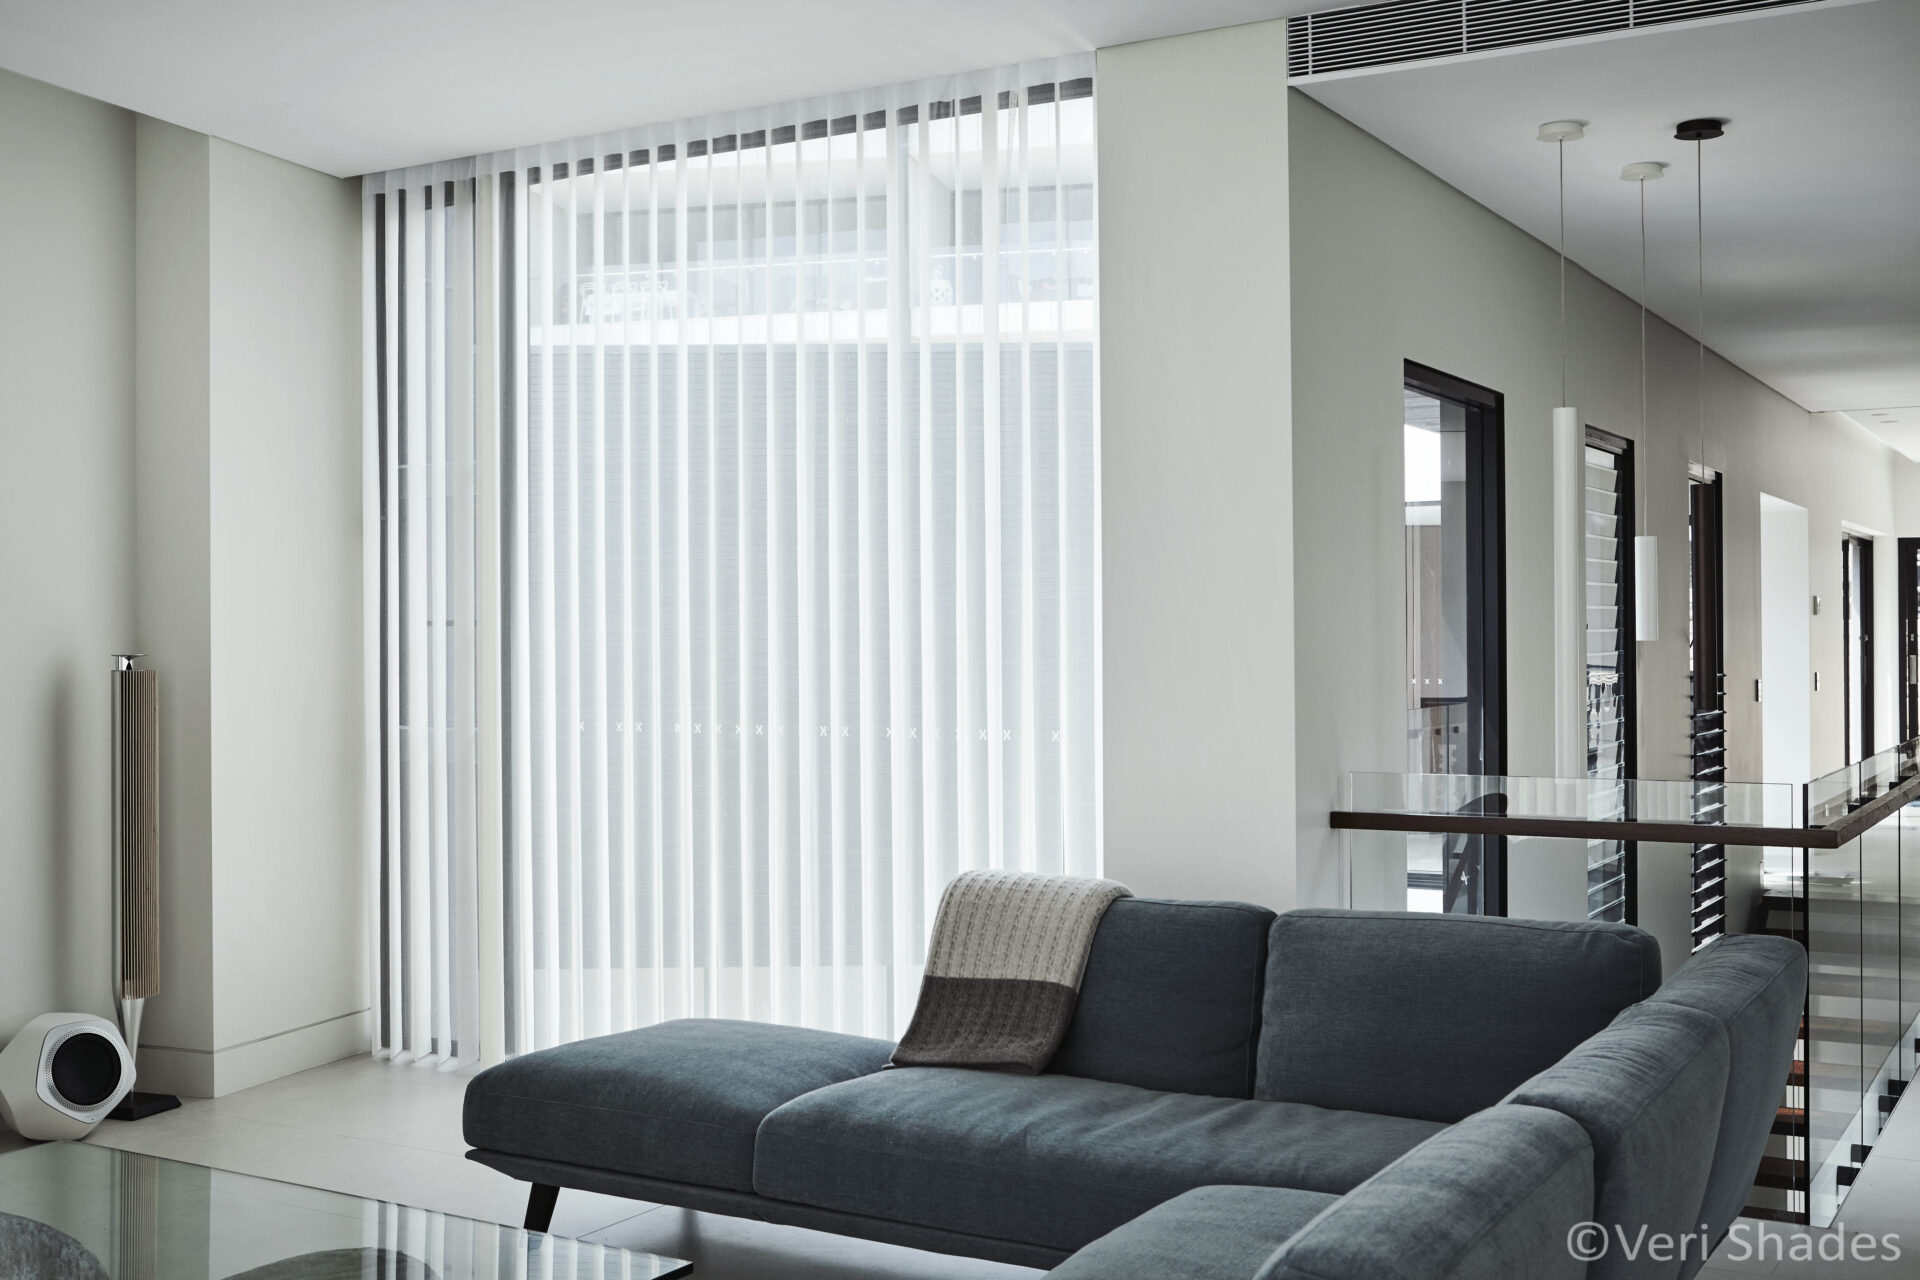 Veri Shades Curtain Living Area - Delux Blinds